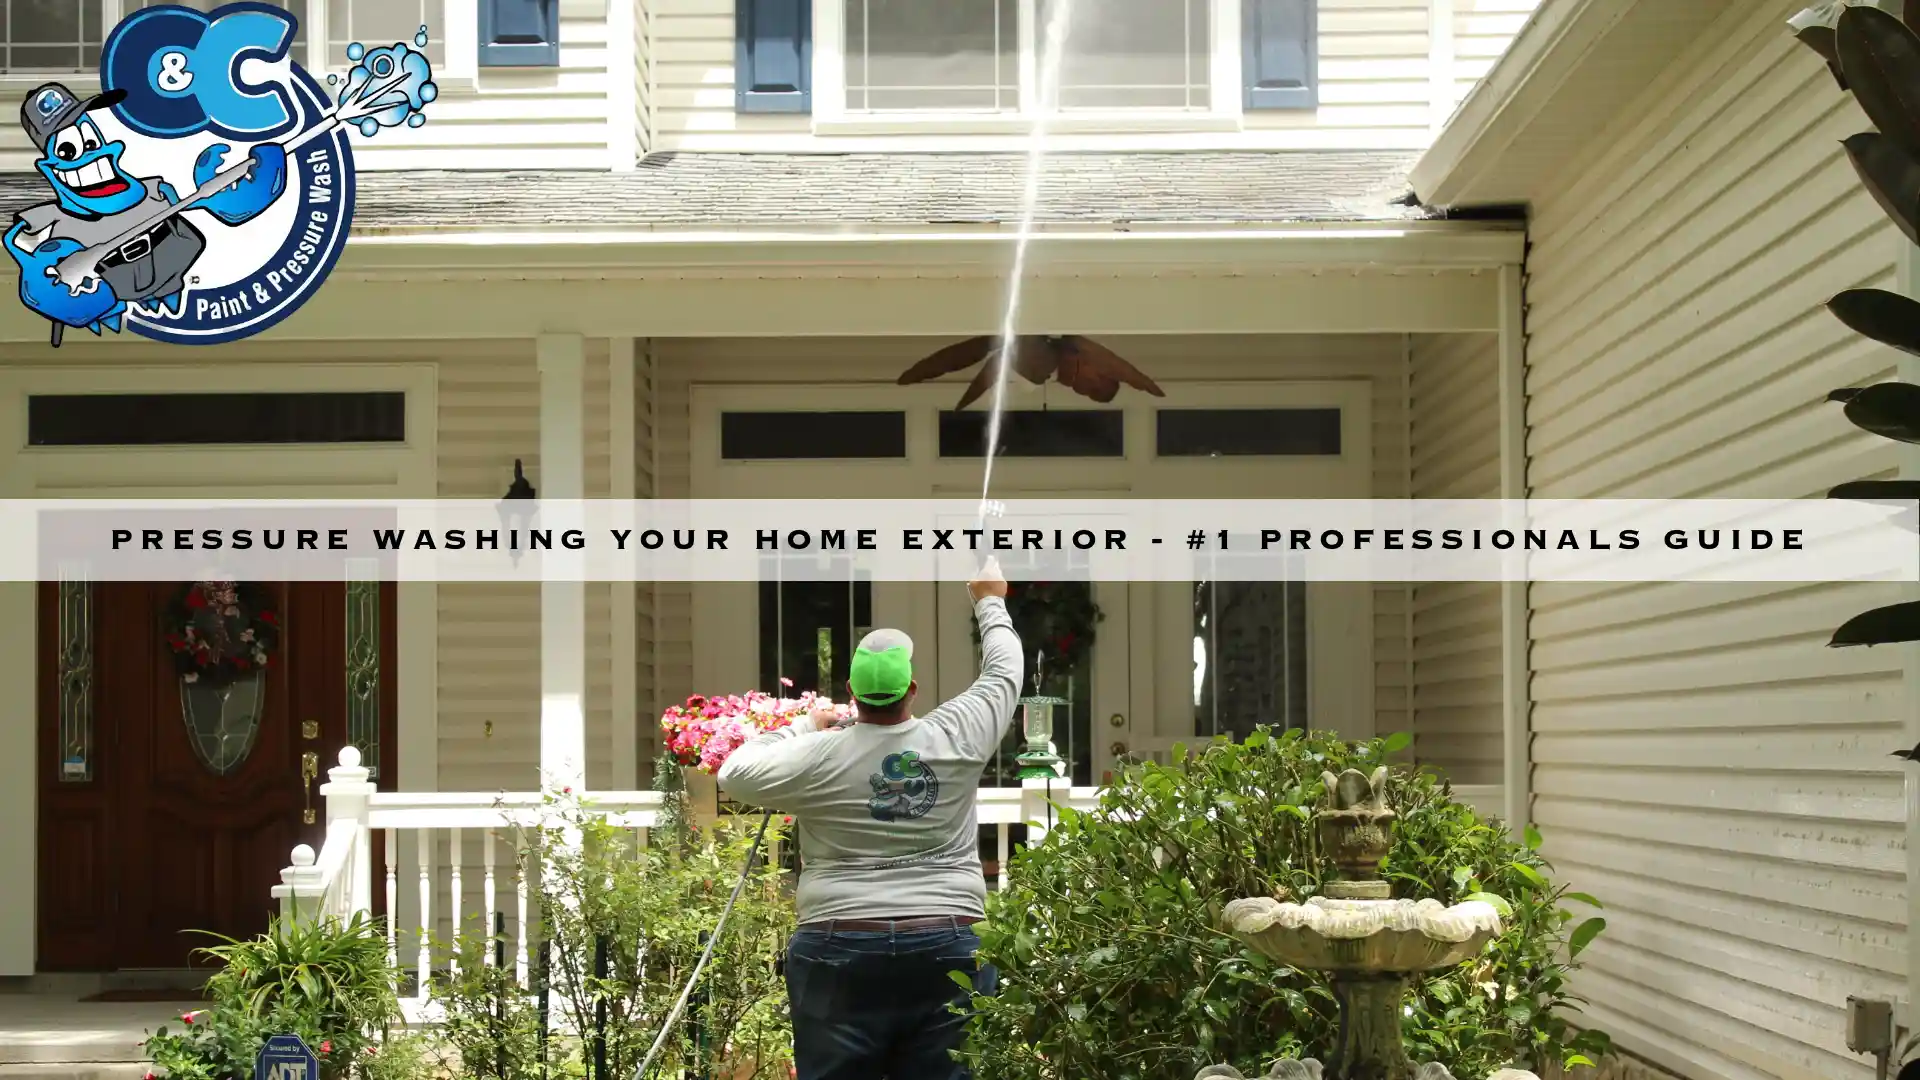 Pressure Washing Your Home Exterior - #1 Professionals Guide